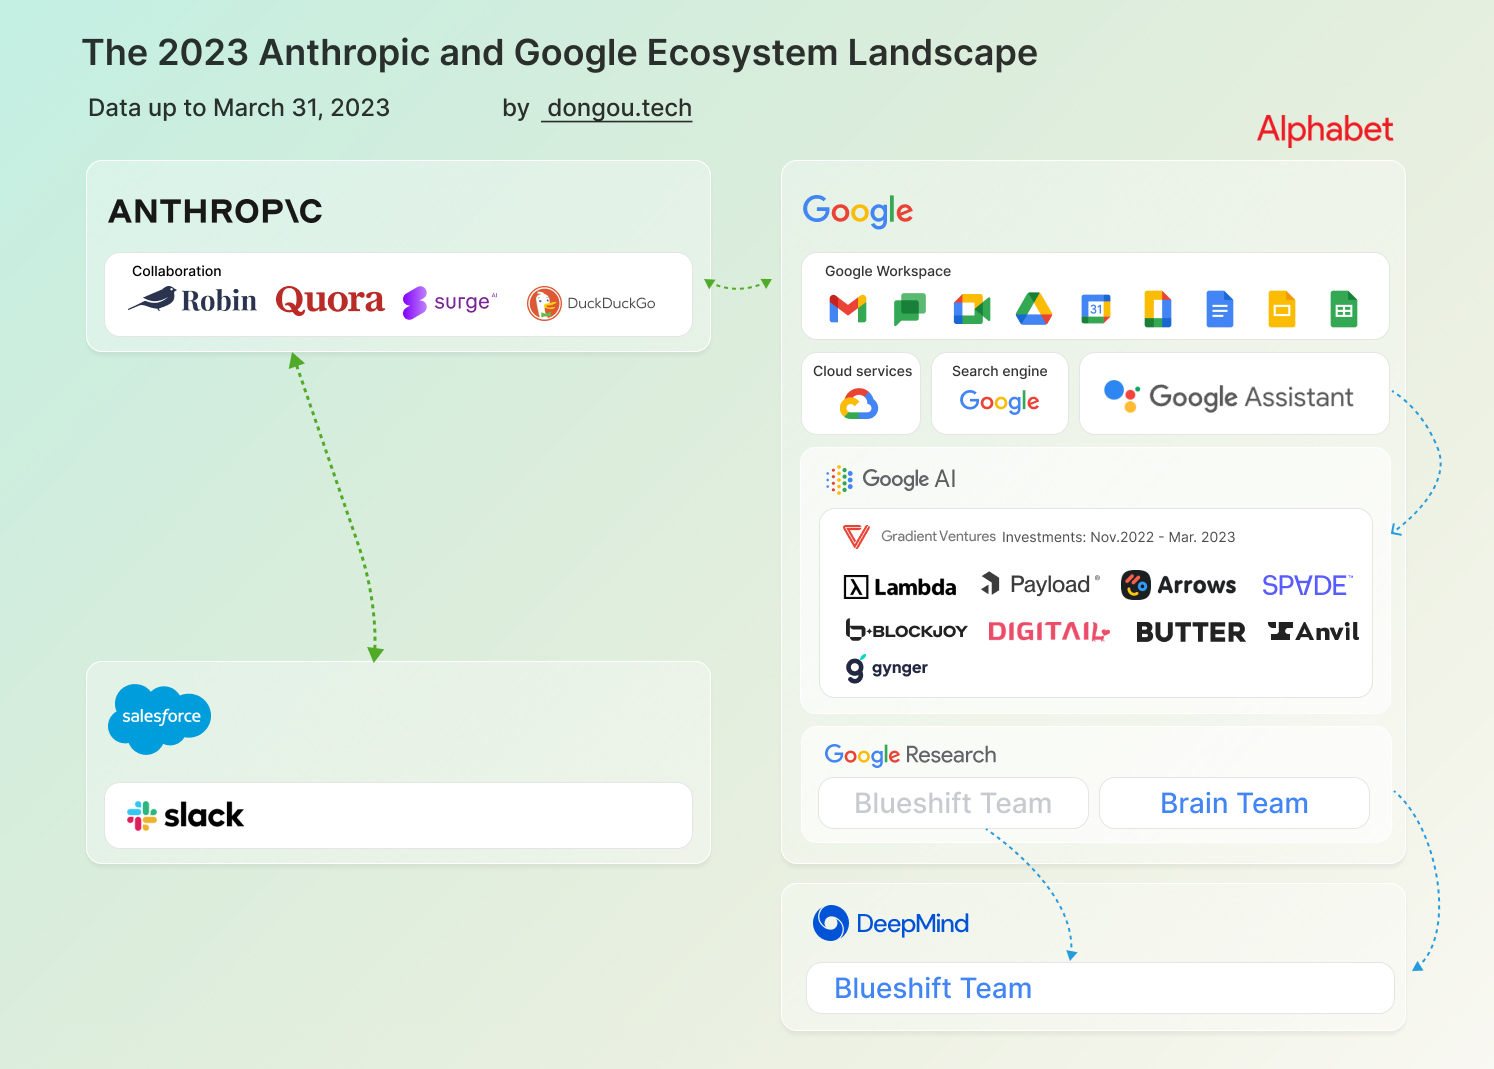 The 2023 Anthropic and Google Ecosystem Landscape